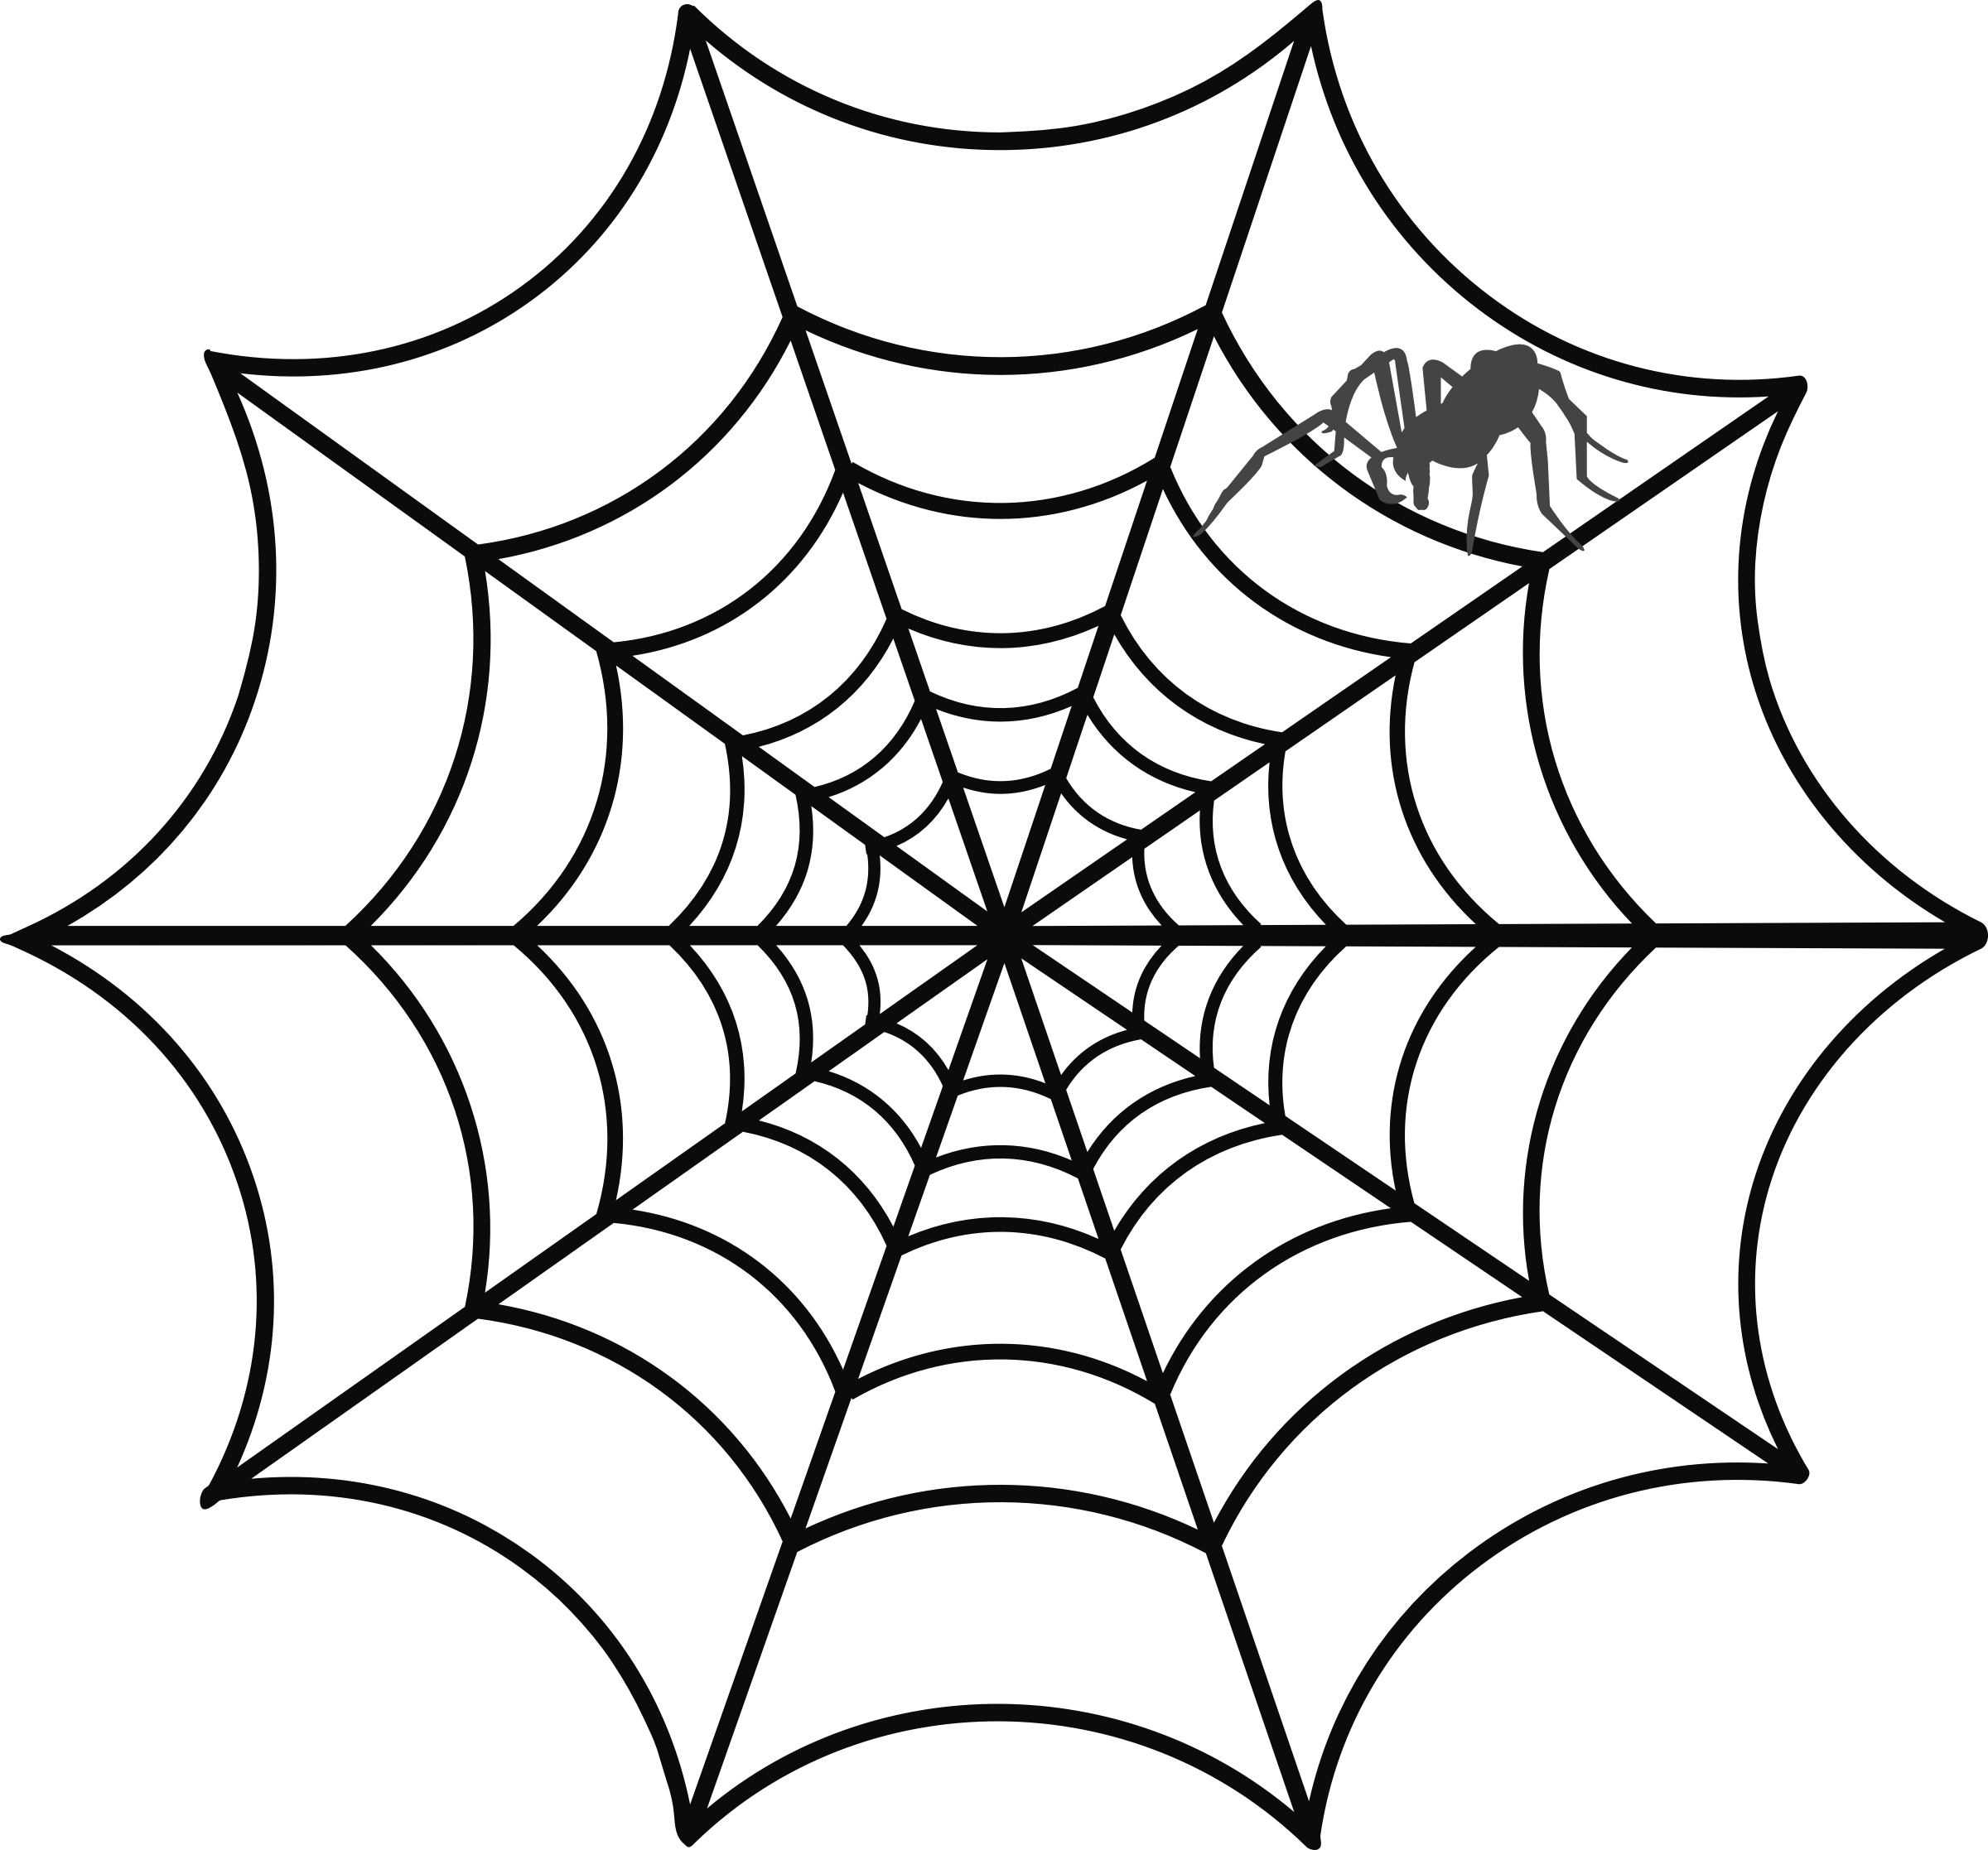 Big Image - Spider Web Cut Out (2400x2234)